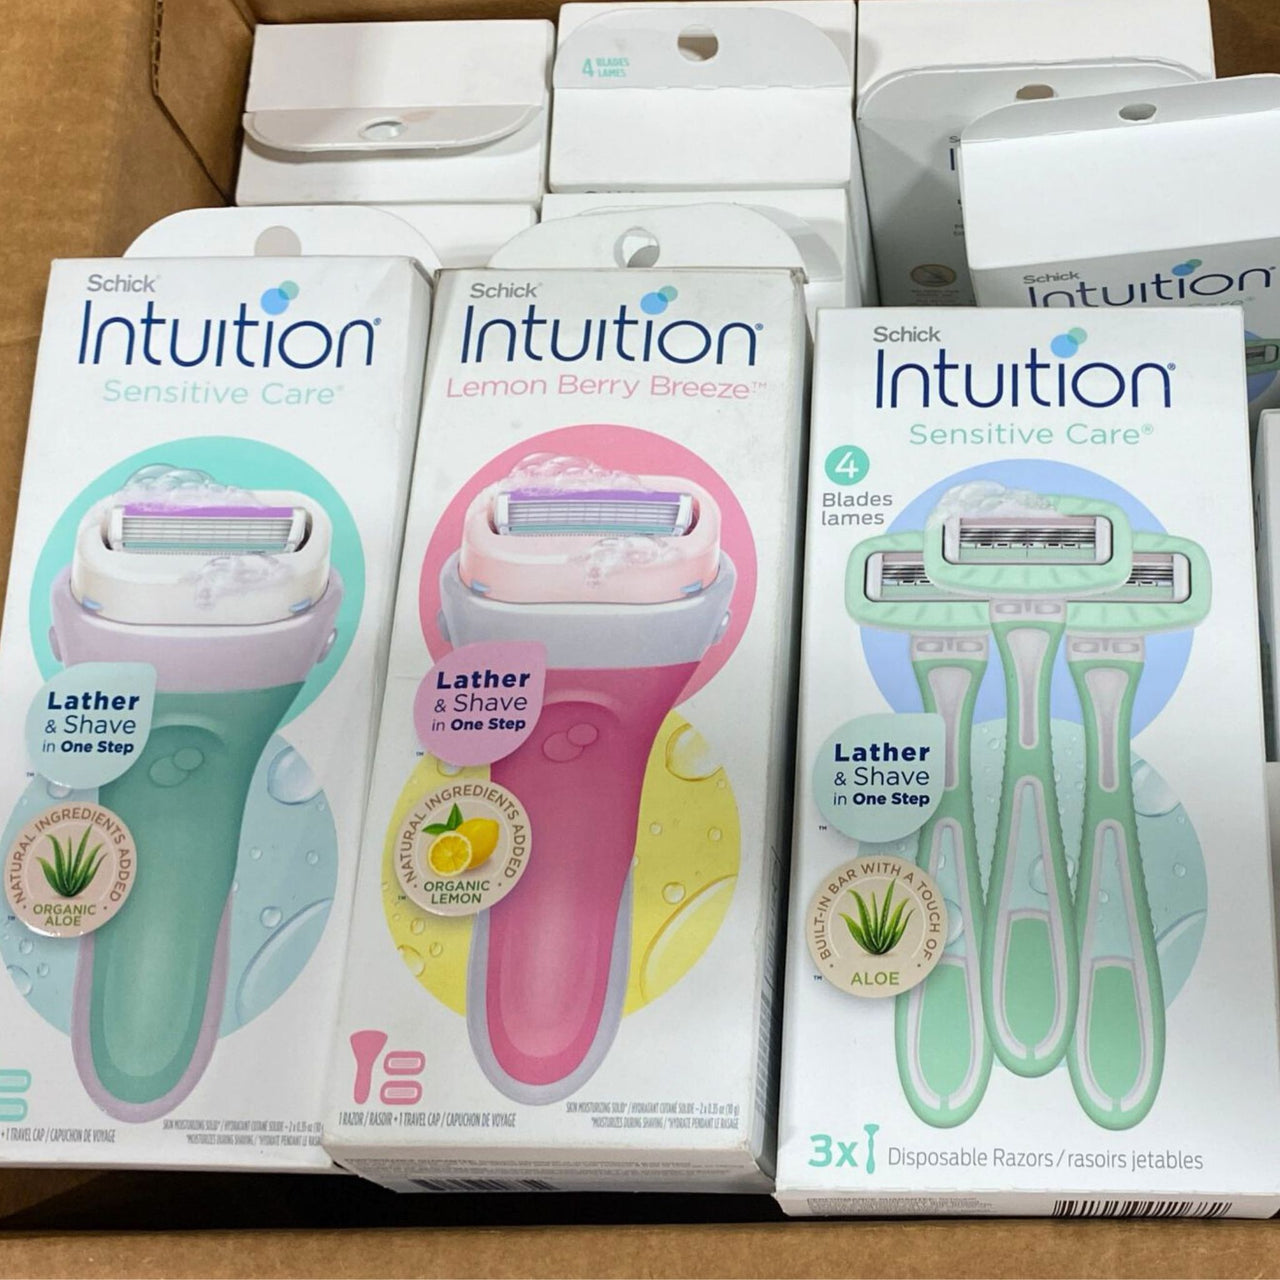 Schick Intuition Mix Includes Razors(MAINLY) & Blades